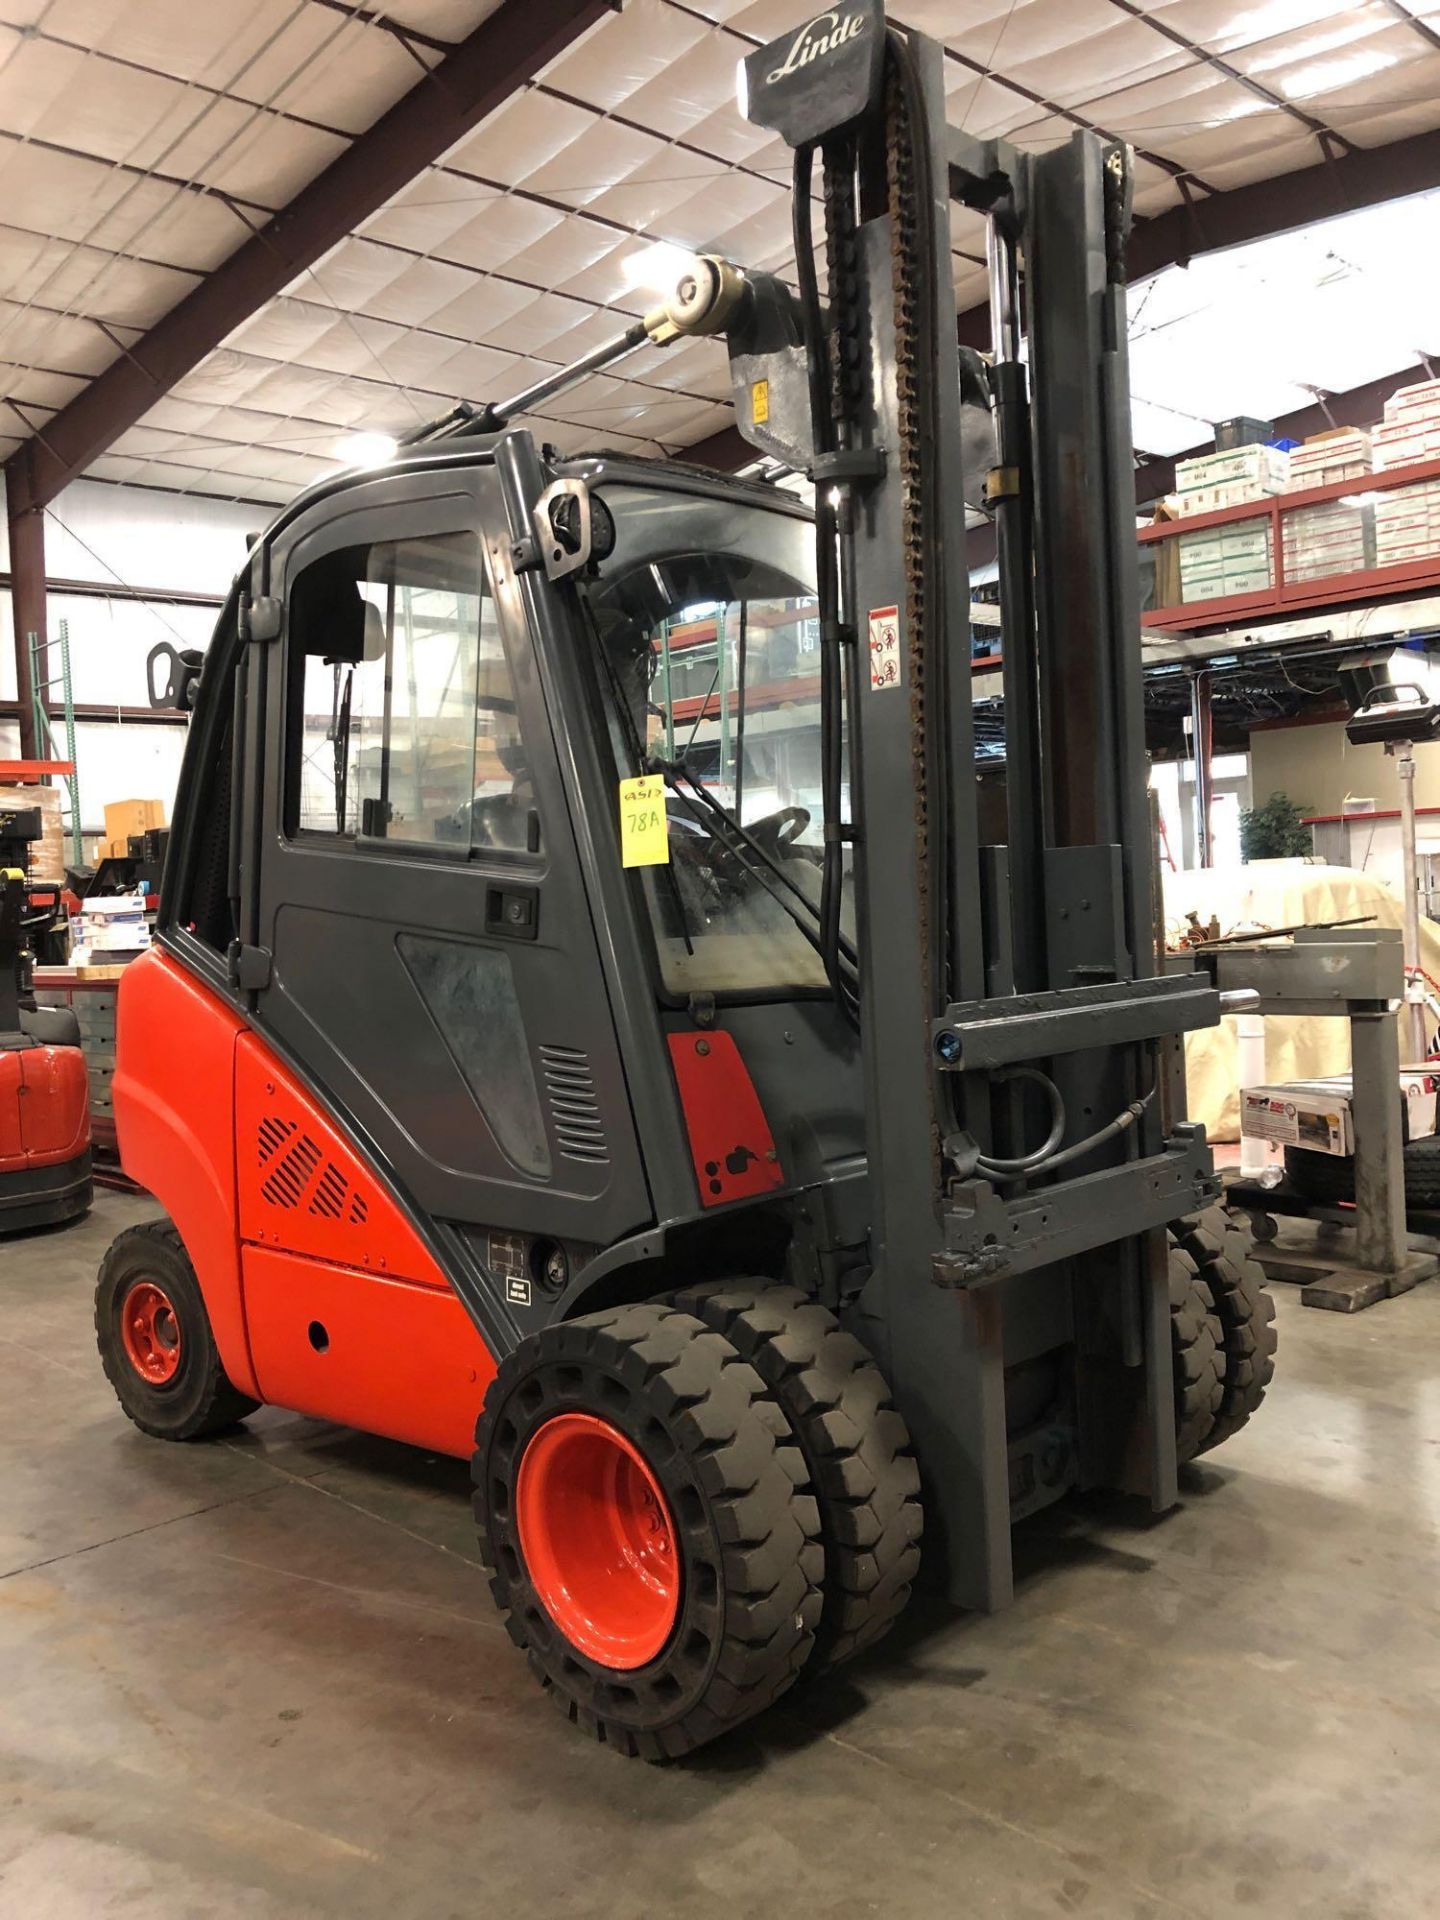 2013 LINDE H35 DIESEL ENCLOSED/CLIMATE CONTROLLED CAB FORKLIFT, APPROX. 7,500 LB LIFT CAPACITY, DUAL